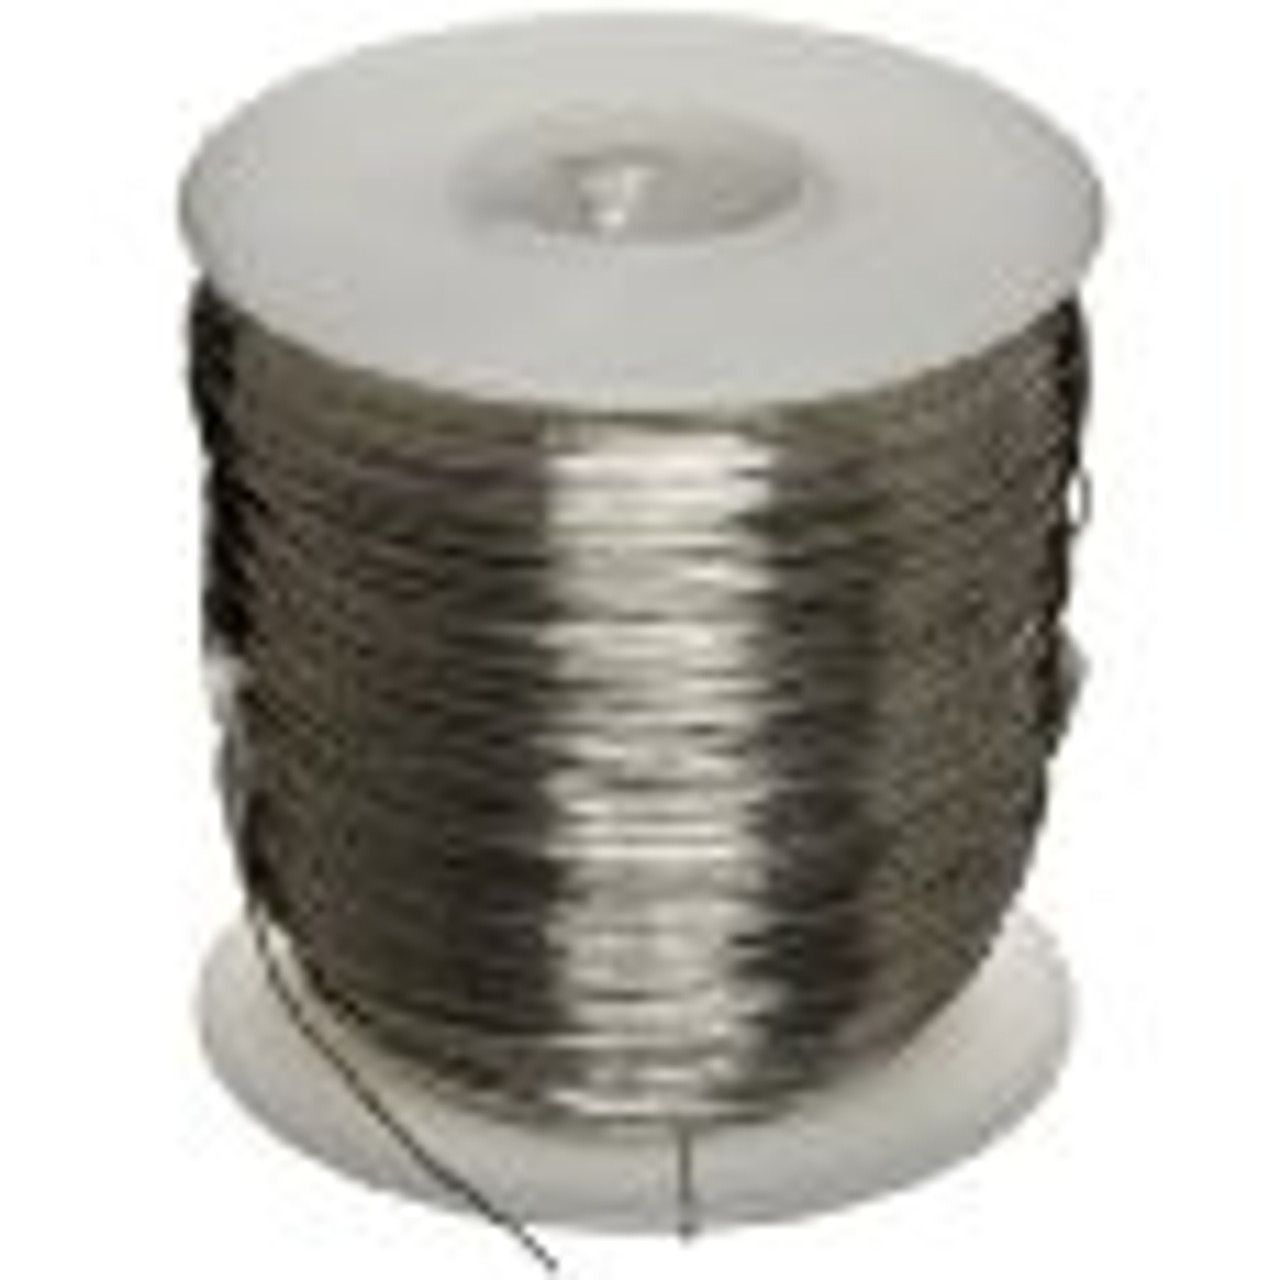 Pretinned Copper Wire 14 Gauge 1 Lb: Other Products: : Tools &  Home Improvement